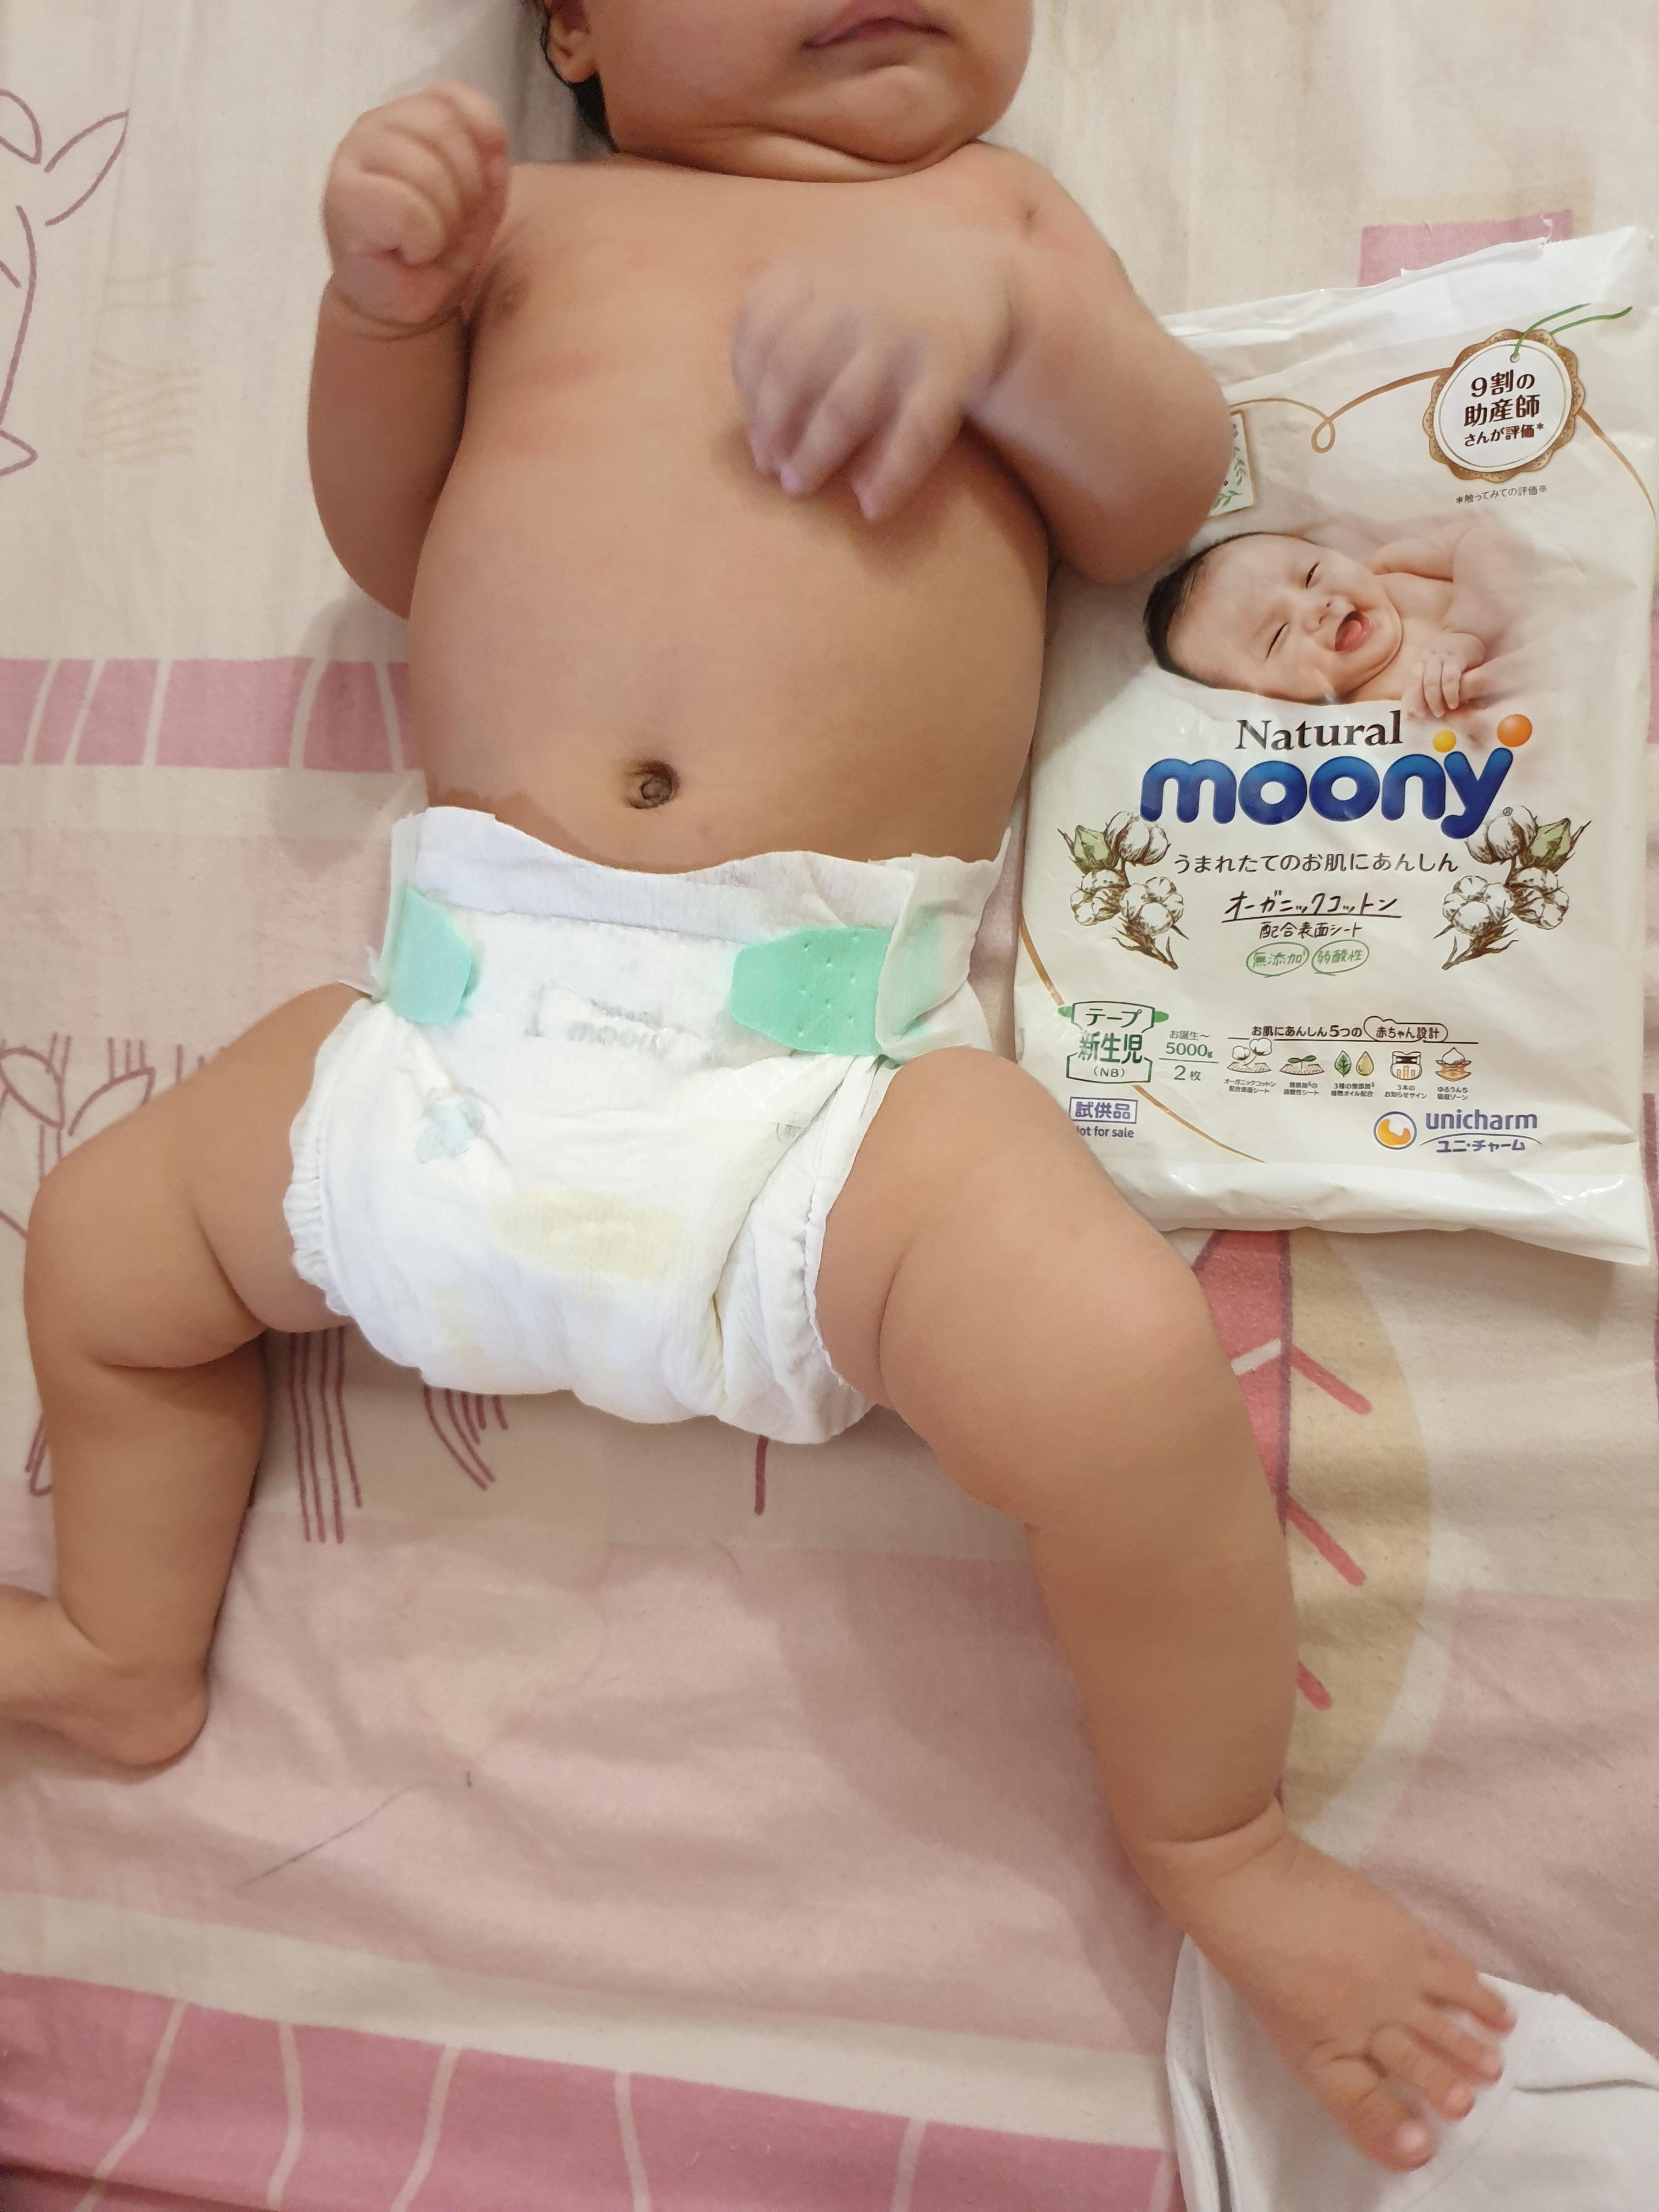 Natural moony diaper by Moony : review - Diapering- Tryandreview.com